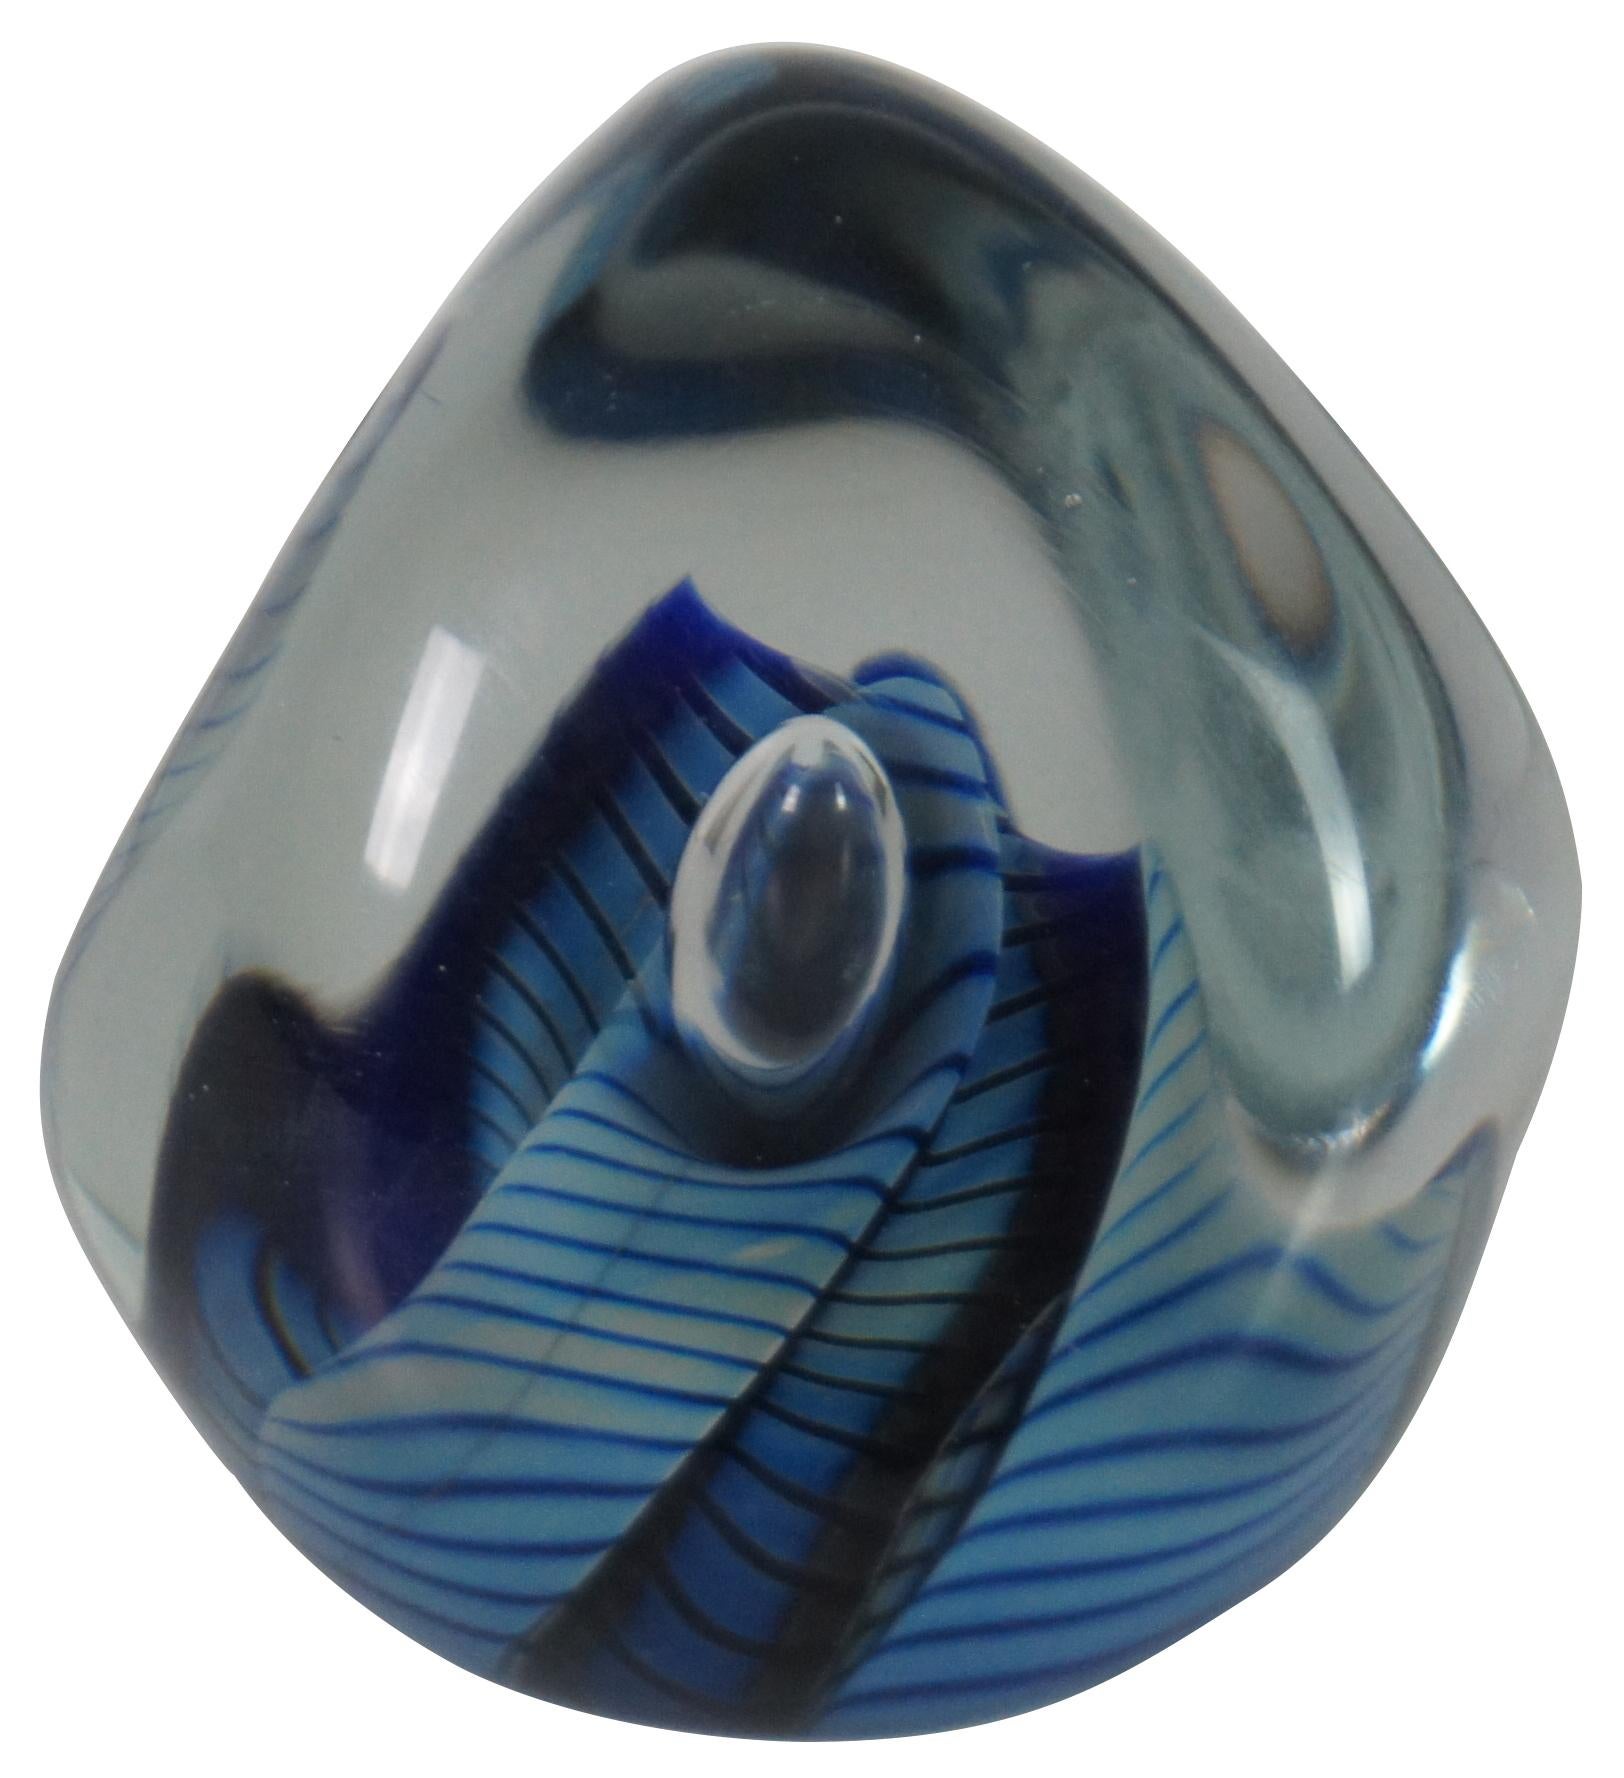 Vintage Robert Eickholt studio art glass paperweight featuring a clear abstract form filled with rippling stripes in various shades of blue and a large controlled bubble at the center. Signed and dated 1988 on base.

Robert Eickholt is a well